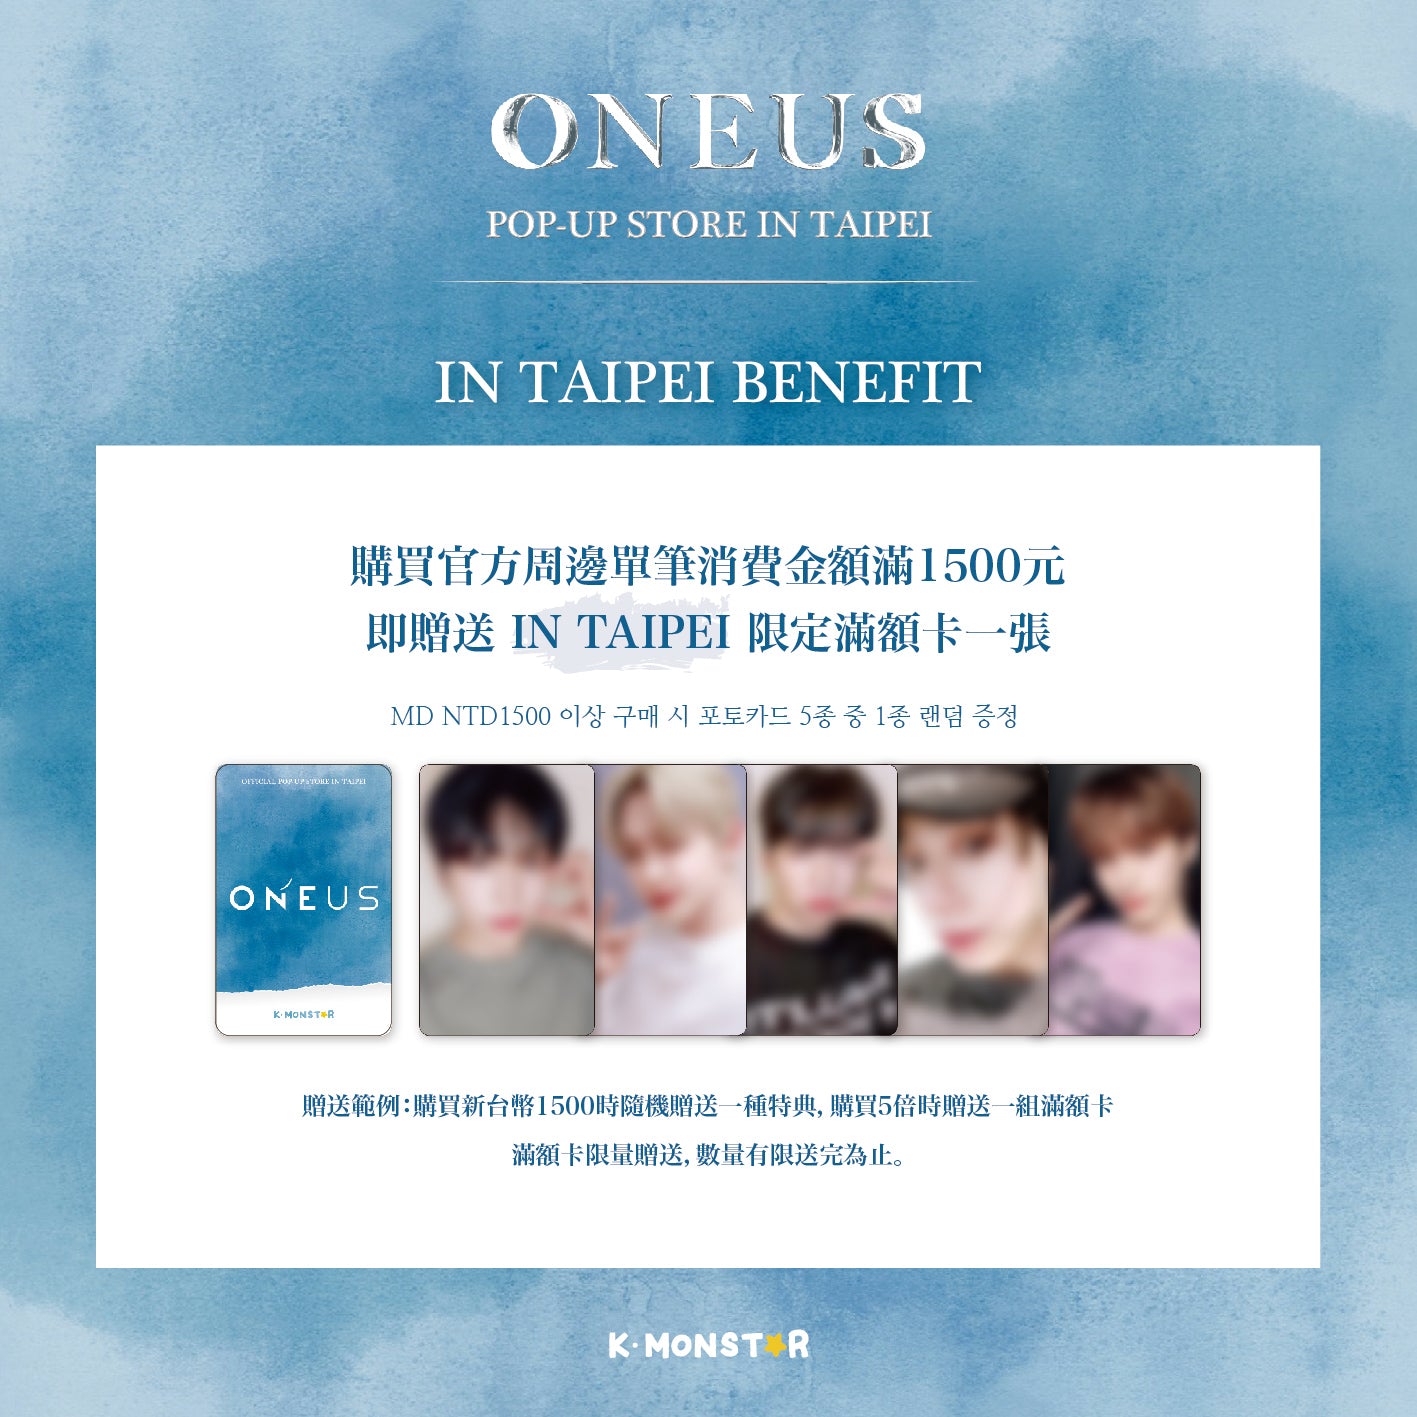 ONEUS | La Dolce Vita POP-UP STORE IN TAIPEI | OFFICIAL SLING BAG